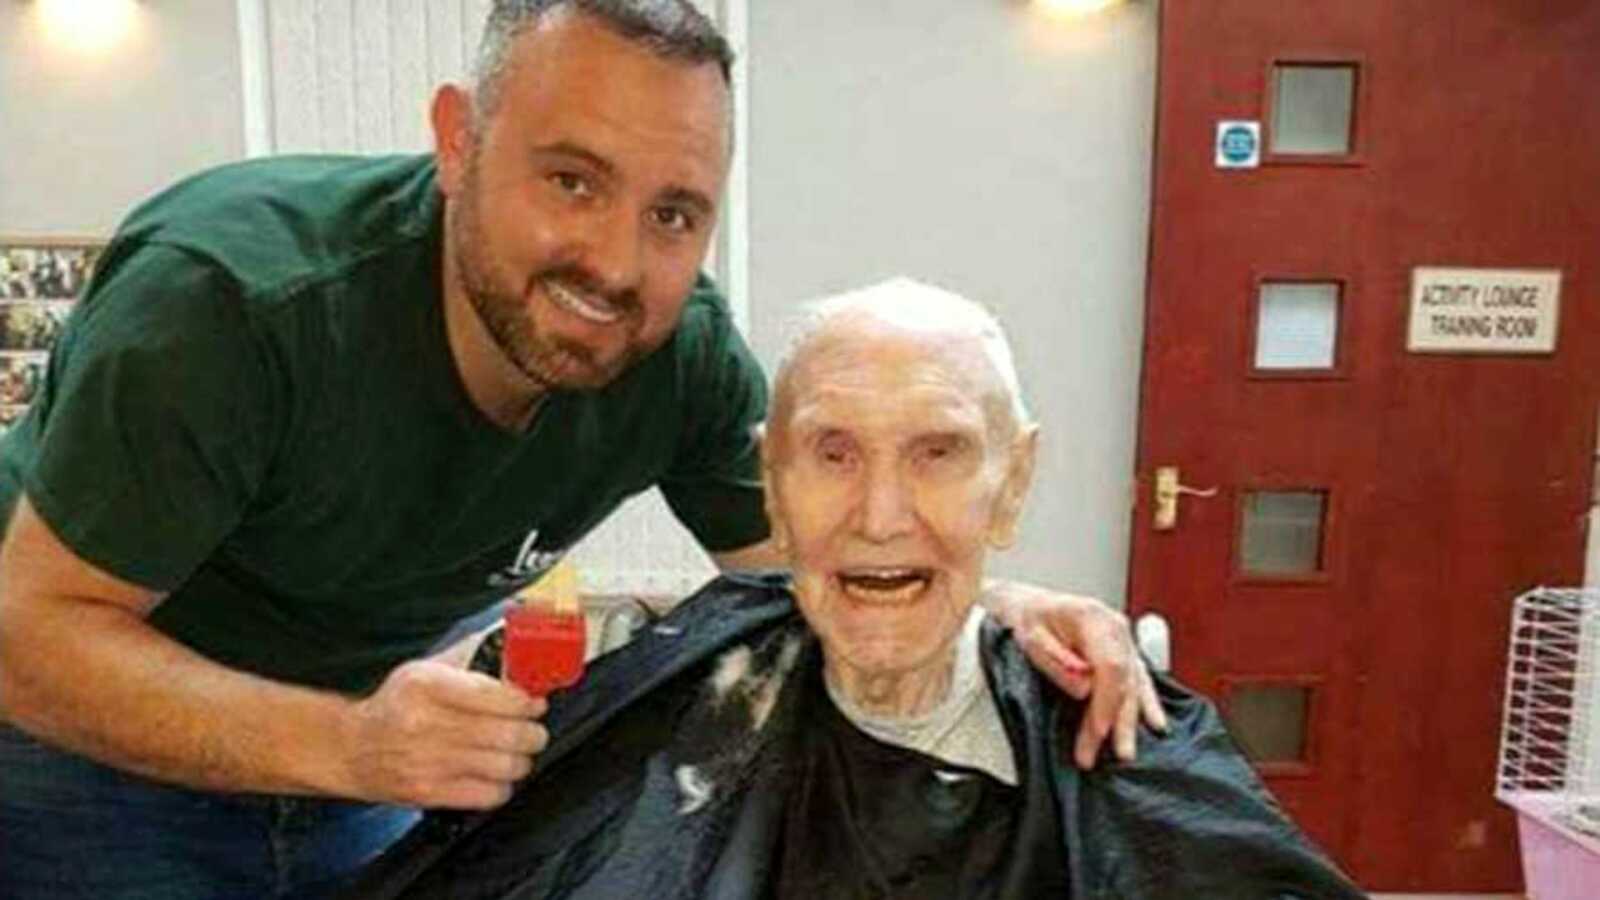 Old woman with dementia getting haircut from barber